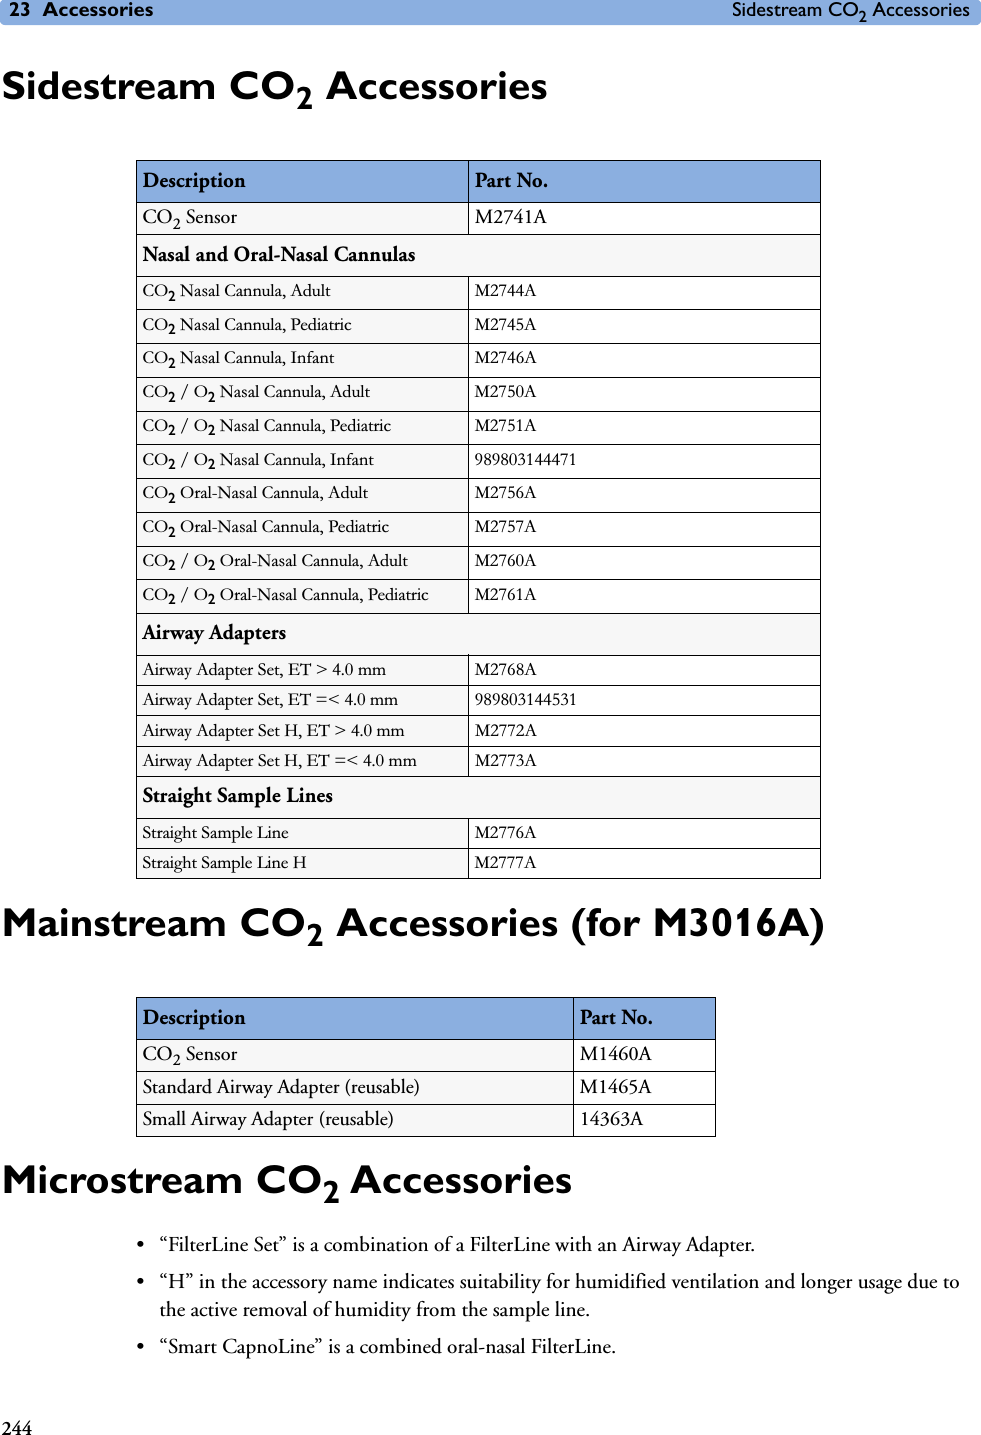 23 Accessories Sidestream CO2 Accessories244Sidestream CO2 AccessoriesMainstream CO2 Accessories (for M3016A)Microstream CO2 Accessories• “FilterLine Set” is a combination of a FilterLine with an Airway Adapter. • “H” in the accessory name indicates suitability for humidified ventilation and longer usage due to the active removal of humidity from the sample line.• “Smart CapnoLine” is a combined oral-nasal FilterLine. Description Part No. CO2 Sensor M2741ANasal and Oral-Nasal CannulasCO2 Nasal Cannula, Adult M2744ACO2 Nasal Cannula, Pediatric M2745ACO2 Nasal Cannula, Infant M2746ACO2 / O2 Nasal Cannula, Adult M2750ACO2 / O2 Nasal Cannula, Pediatric M2751ACO2 / O2 Nasal Cannula, Infant 989803144471CO2 Oral-Nasal Cannula, Adult M2756ACO2 Oral-Nasal Cannula, Pediatric M2757ACO2 / O2 Oral-Nasal Cannula, Adult M2760ACO2 / O2 Oral-Nasal Cannula, Pediatric M2761AAirway AdaptersAirway Adapter Set, ET &gt; 4.0 mm M2768AAirway Adapter Set, ET =&lt; 4.0 mm 989803144531Airway Adapter Set H, ET &gt; 4.0 mm M2772AAirway Adapter Set H, ET =&lt; 4.0 mm M2773AStraight Sample LinesStraight Sample Line M2776AStraight Sample Line H M2777ADescription Part No. CO2 Sensor M1460AStandard Airway Adapter (reusable) M1465ASmall Airway Adapter (reusable) 14363A